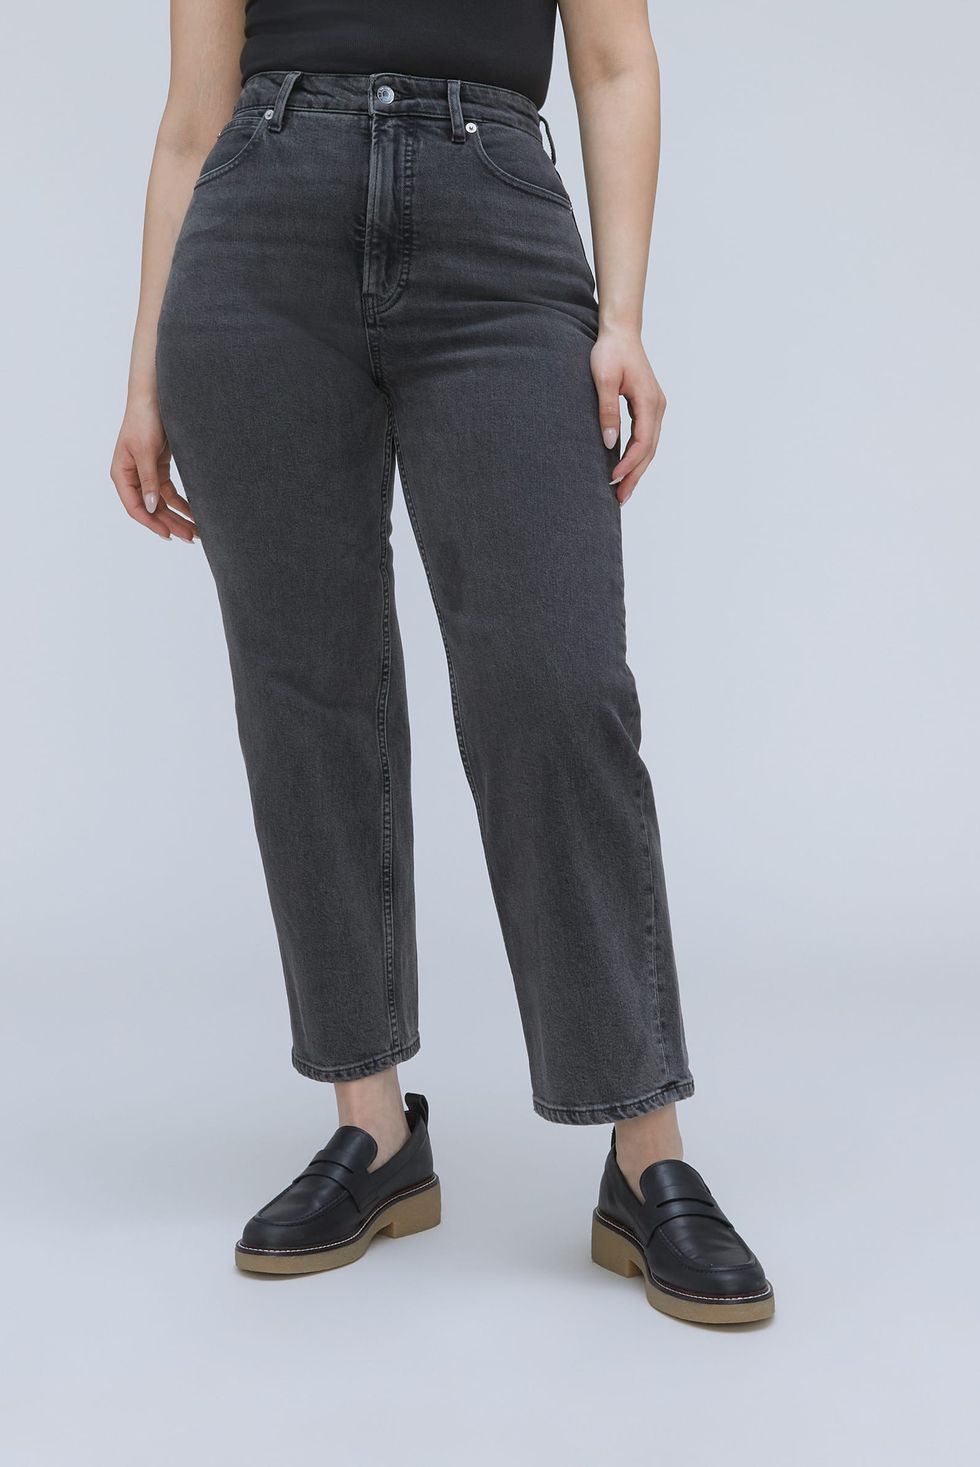 John Lewis ANYDAY Cotton Joggers, Midnight Grey